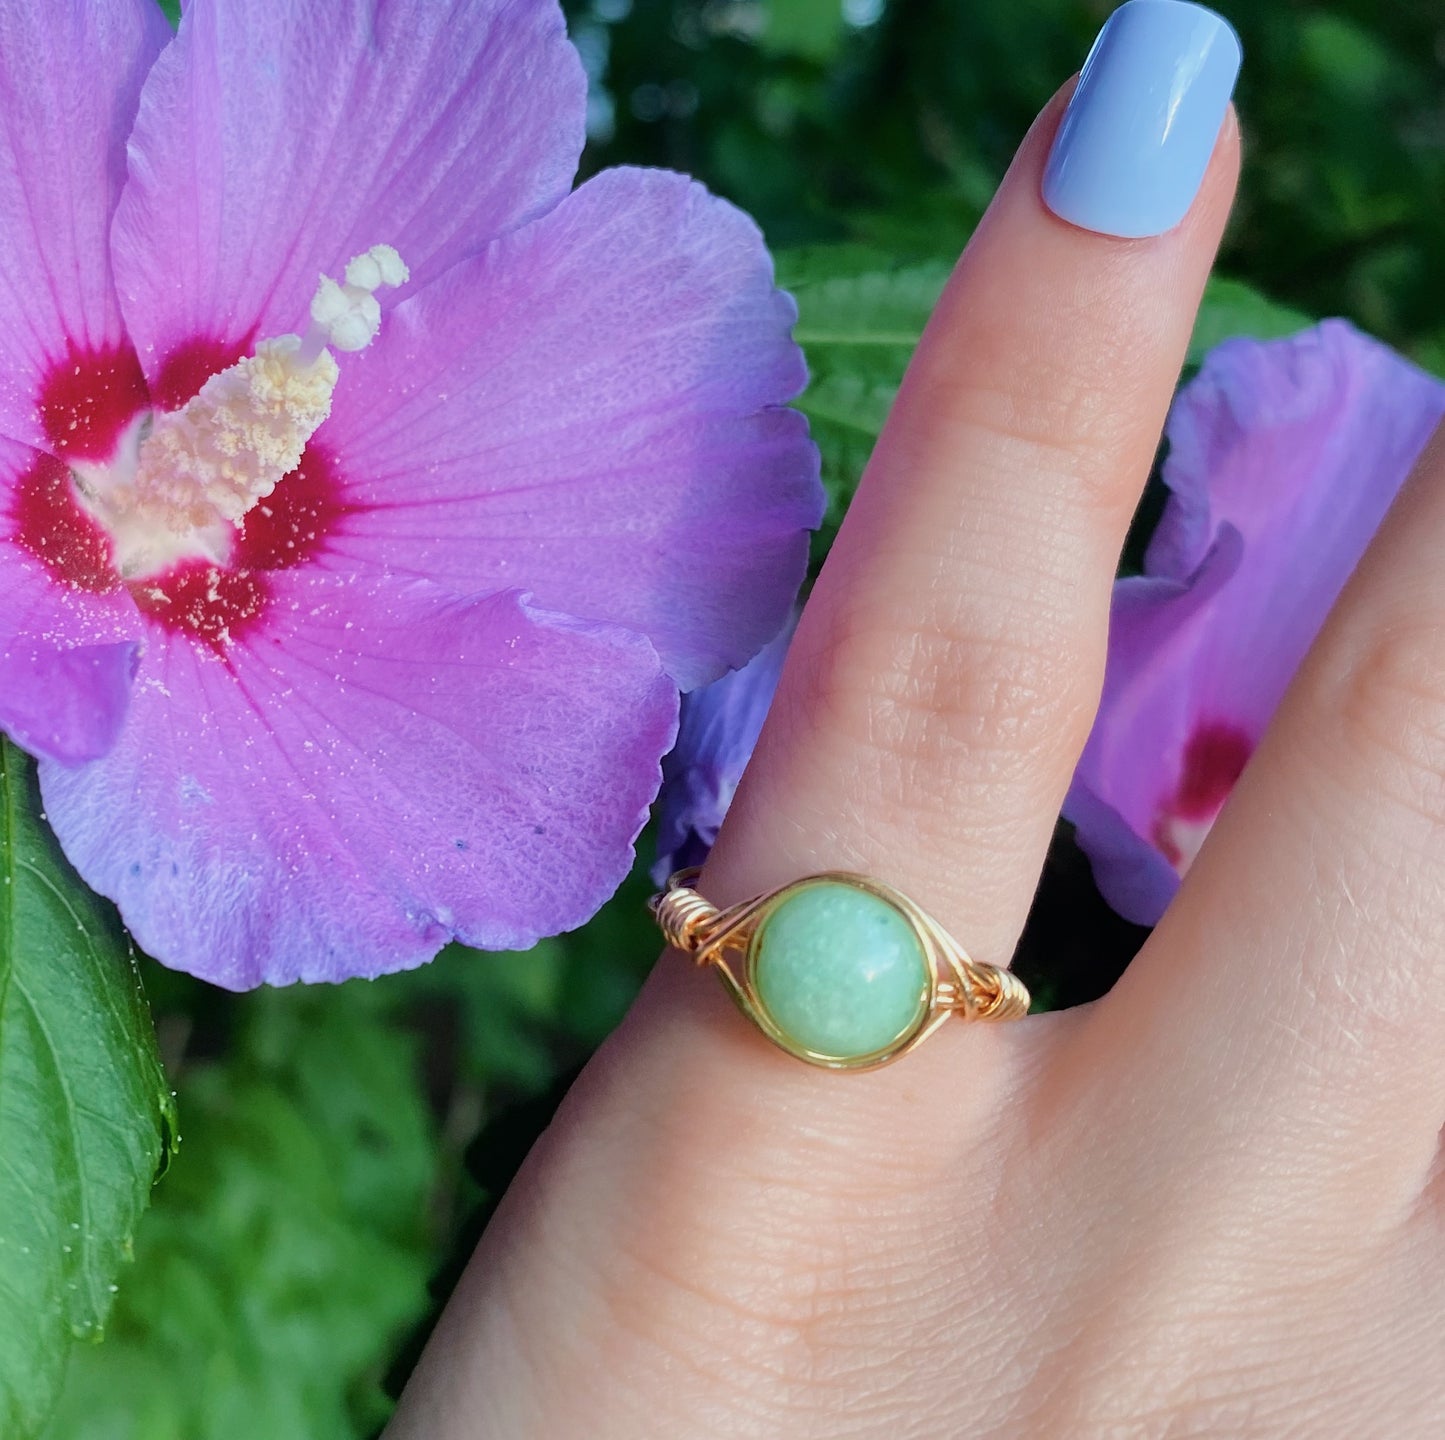 Mint quartzite wire wrapped ring